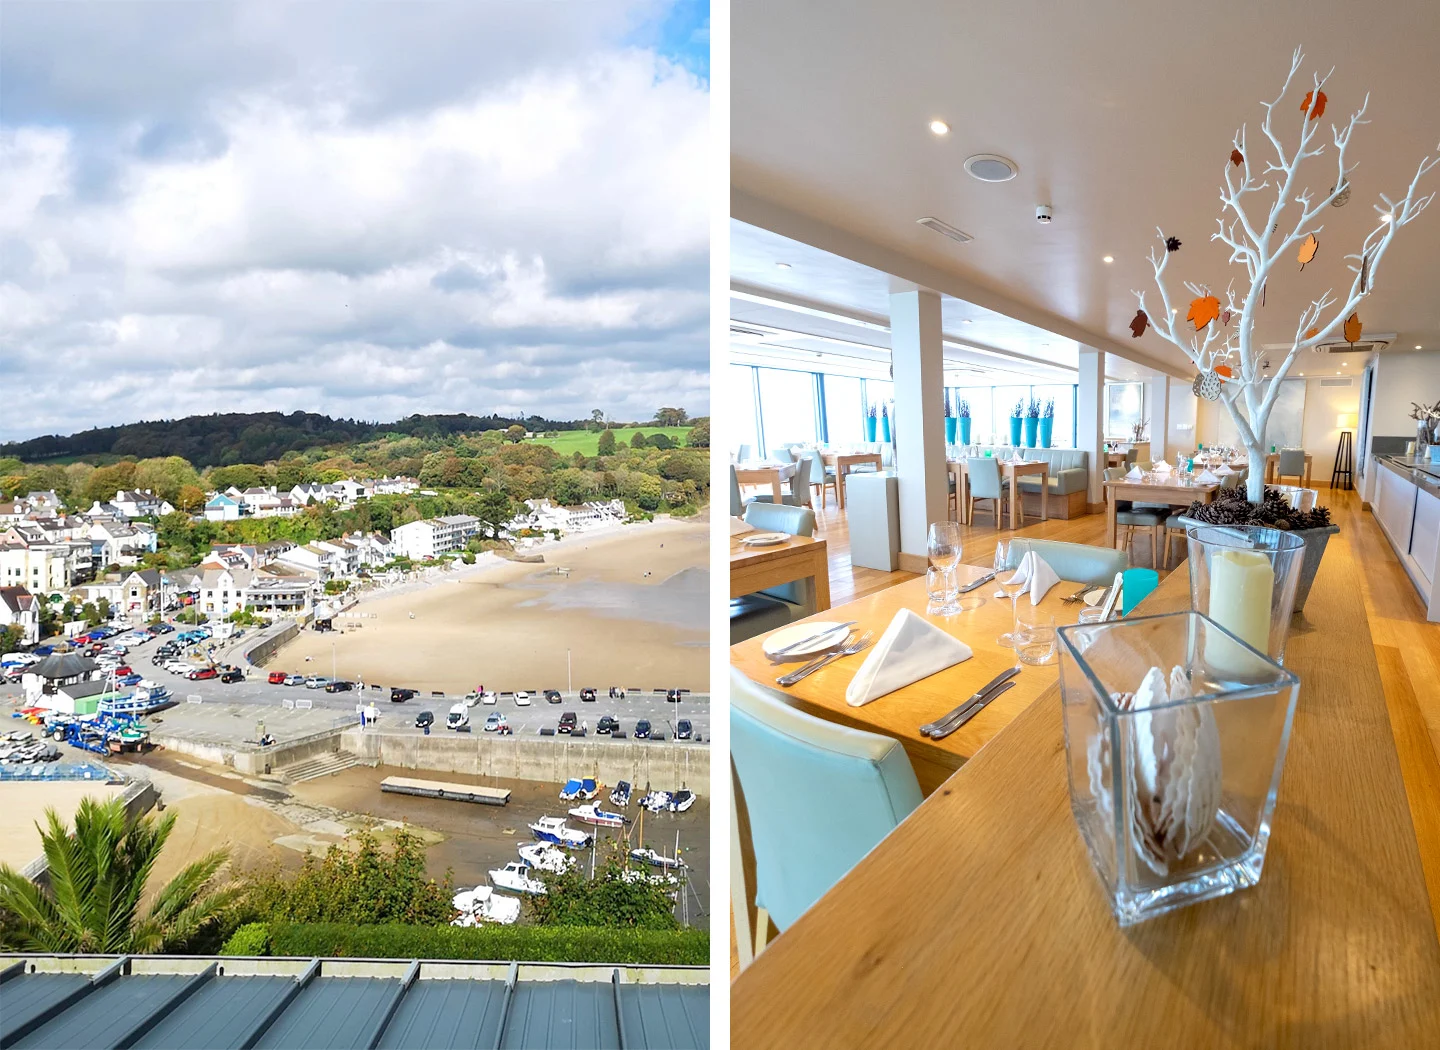 The St Brides Spa Hotel in Saundersfoot, South Wales